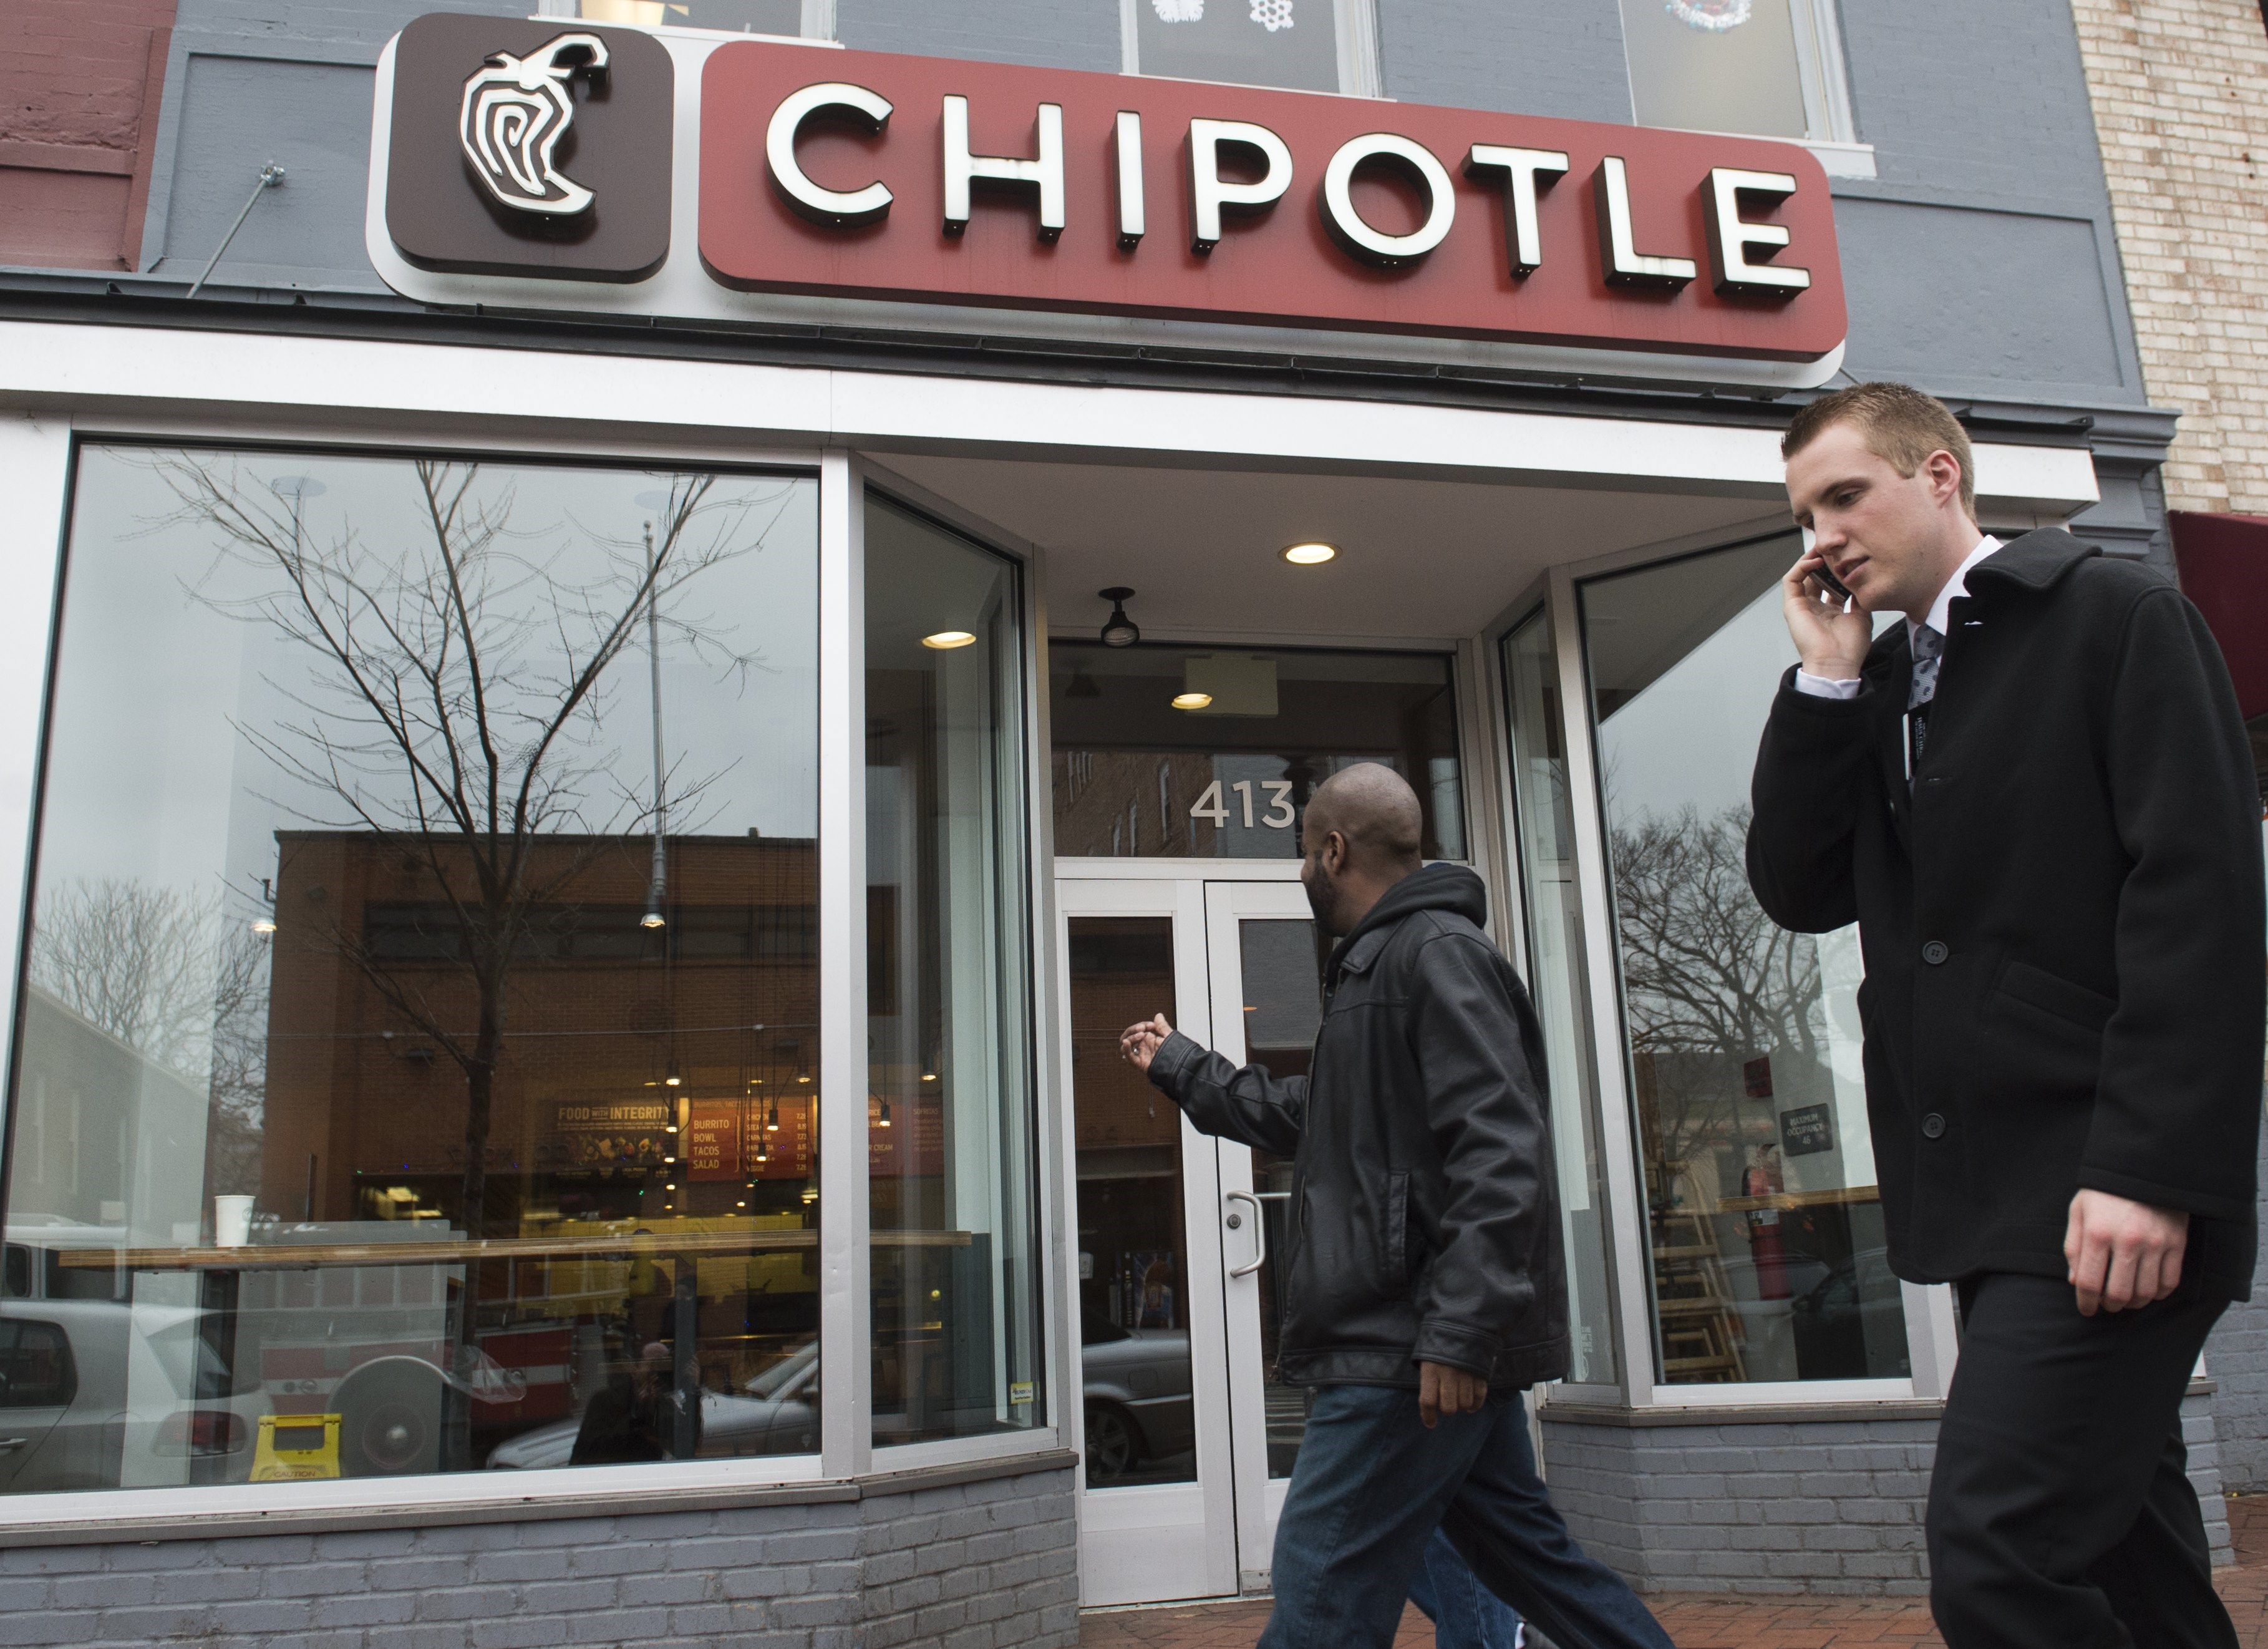 Chipotle Closed Briefly for Food Safety Meeting